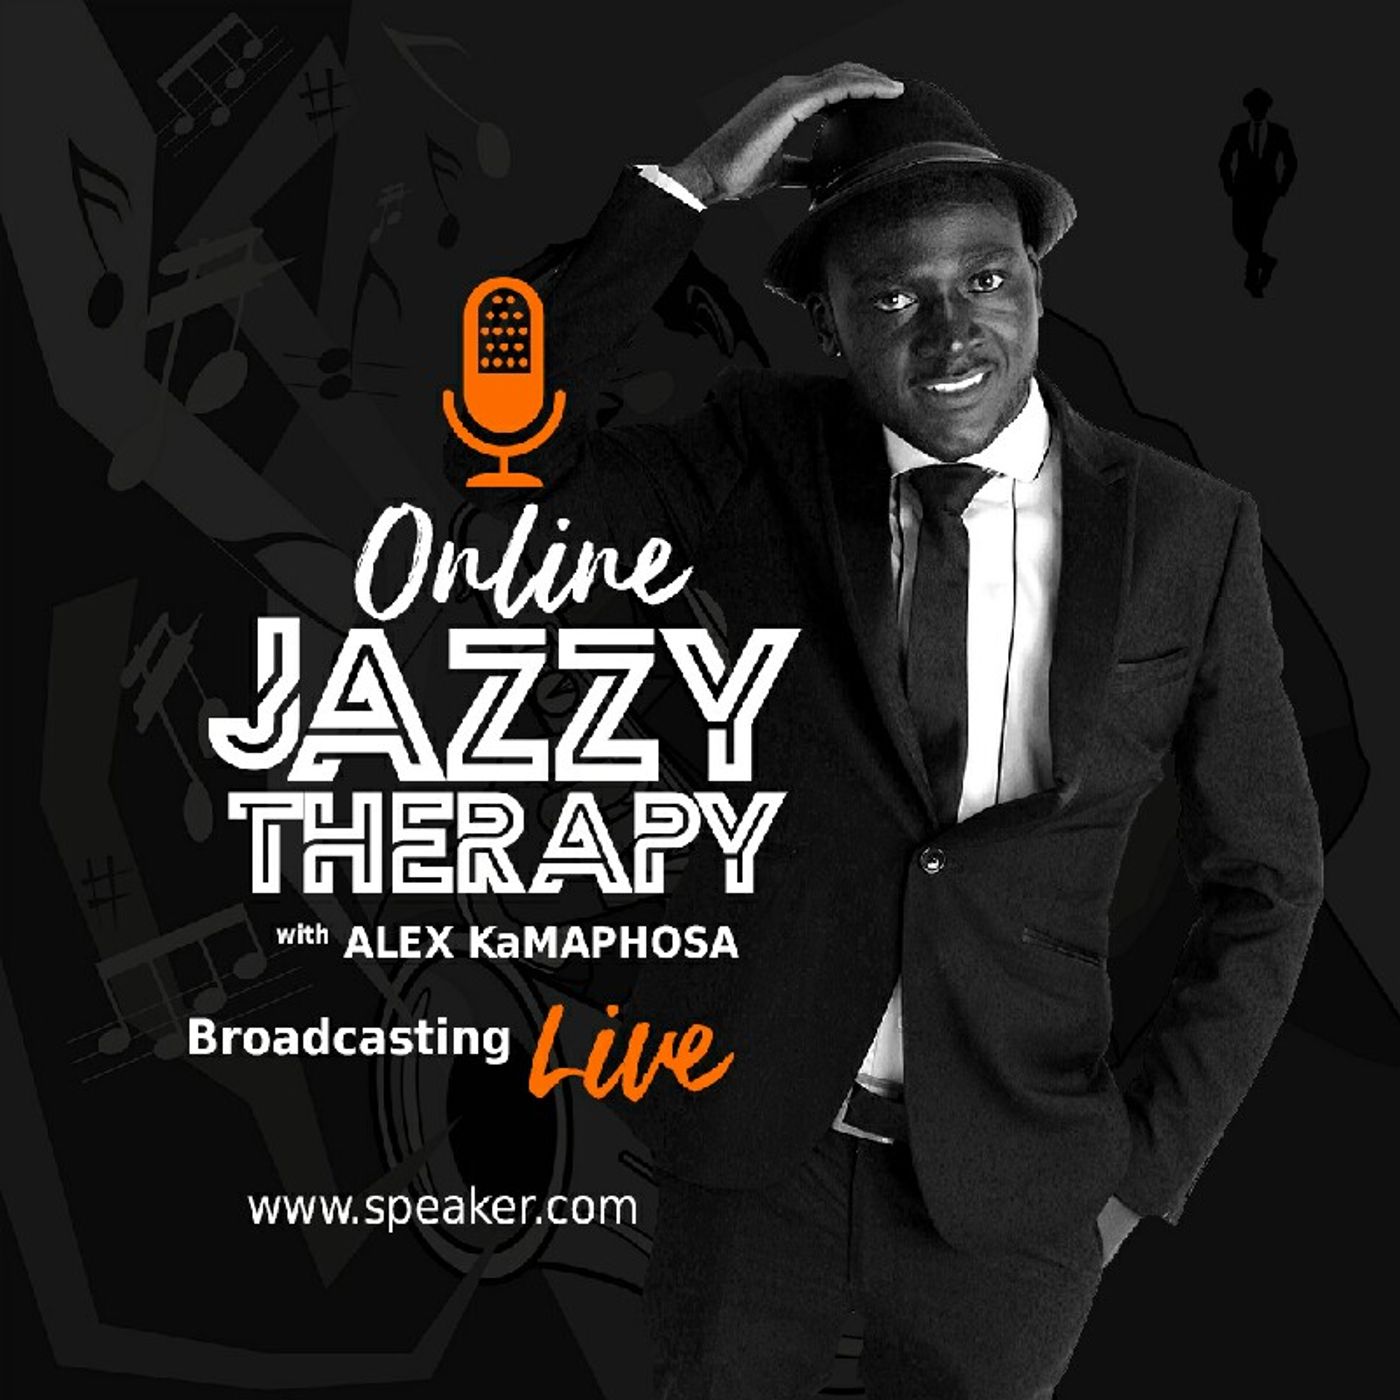 JAZZY THERAPY's show